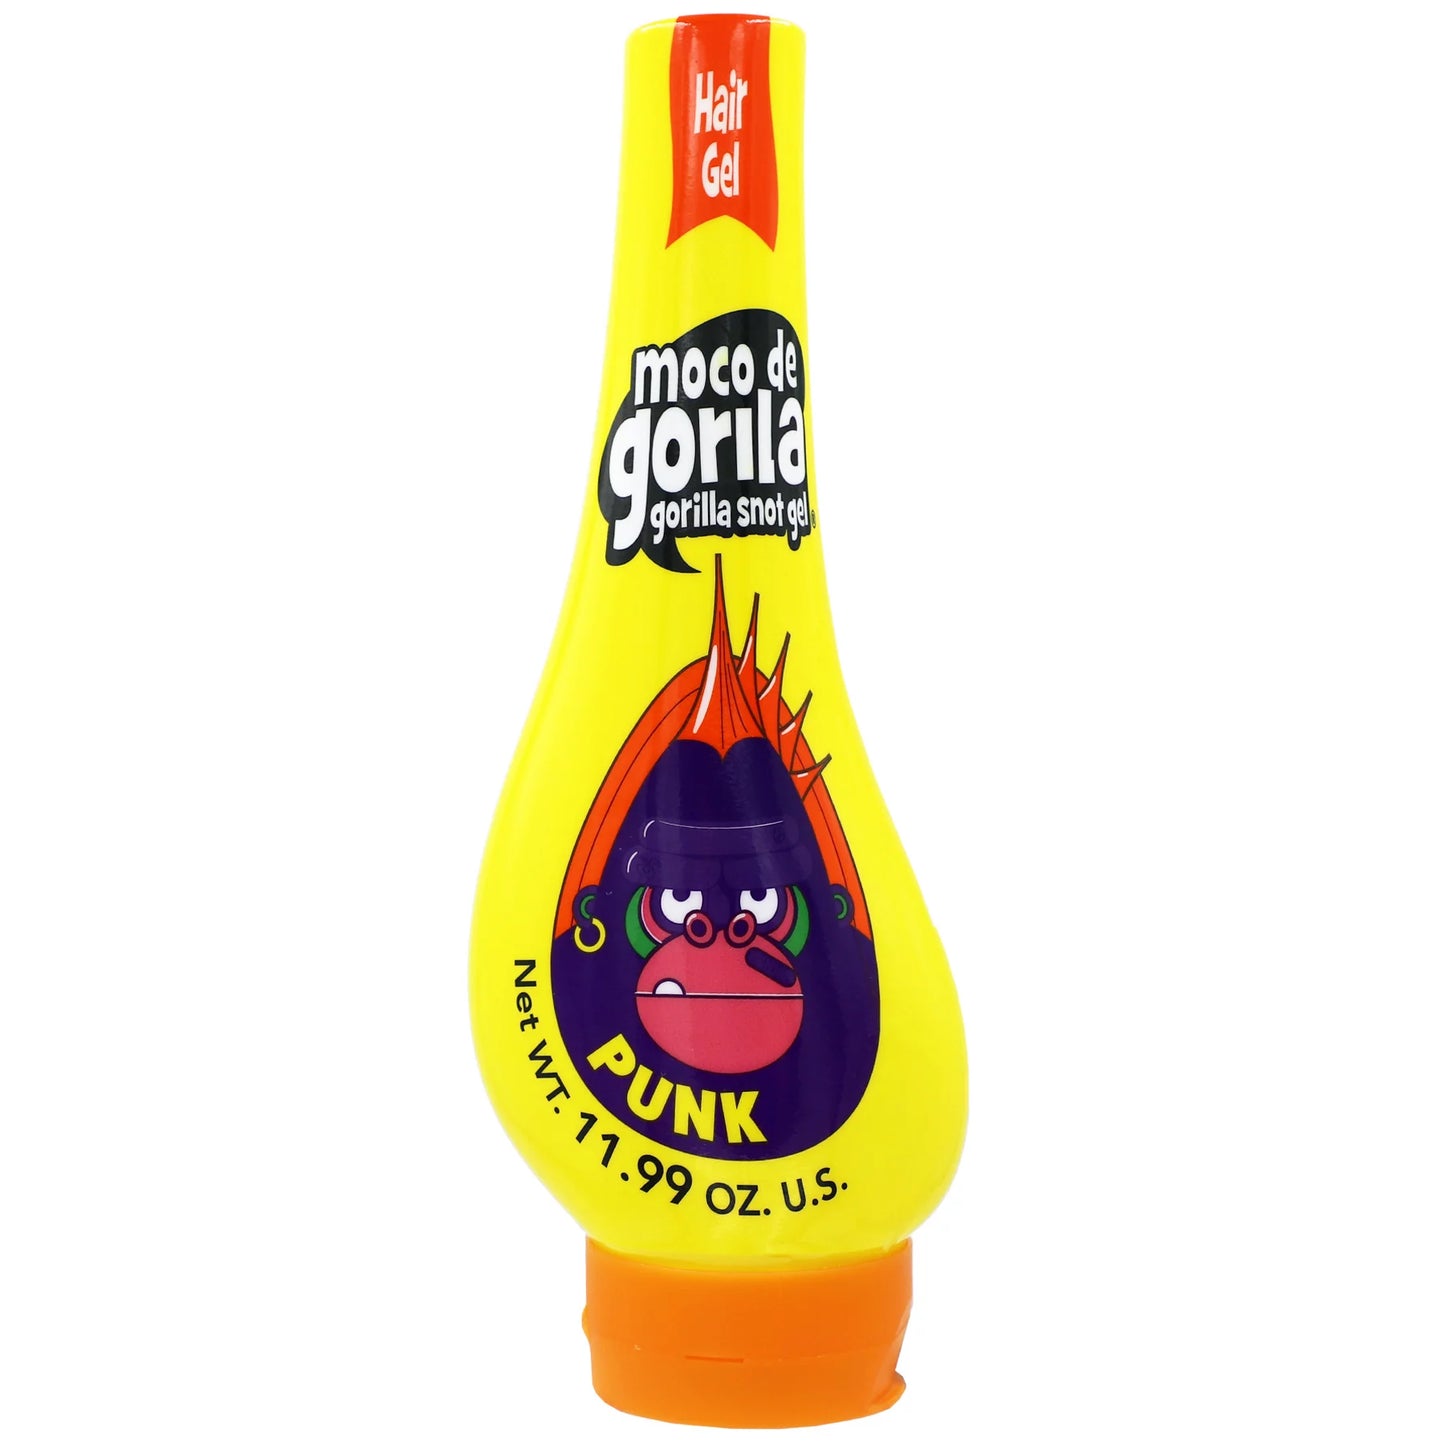 Moco de Gorila Hair Gel | Extra Brillante Hair Styling Gel for Extreme Long-lasting Hold, Gorilla Snot Gel is the Ultimate Hair Gel to bring Shine to any Hairstyle; 11.9 oz Squizz Bottle